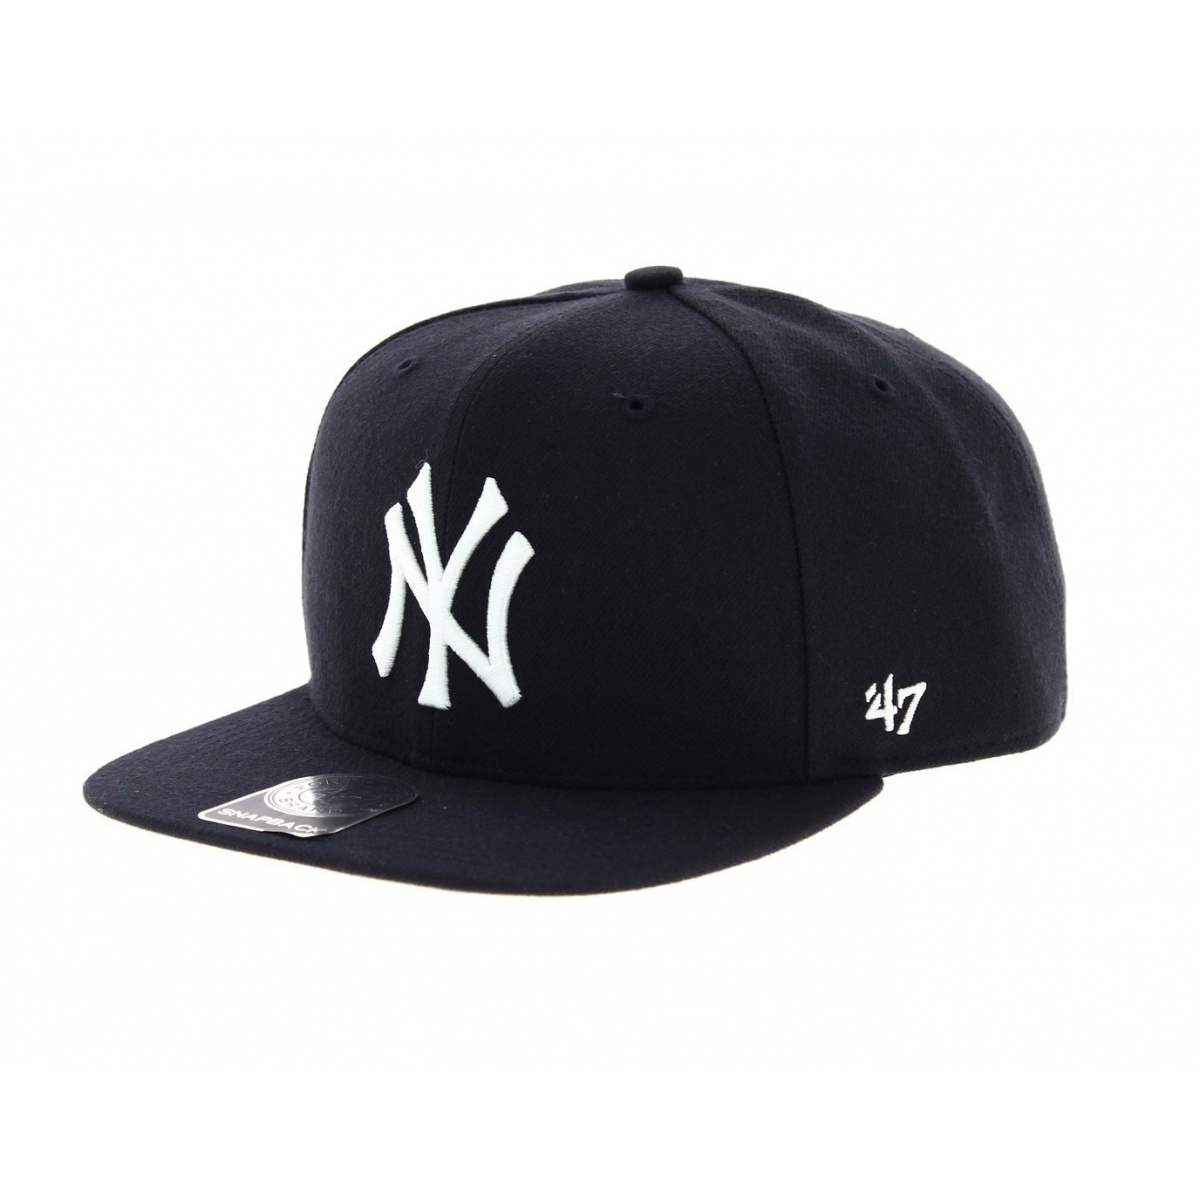 Casquette NY Yankees marine - 47 Brand Reference : 5632